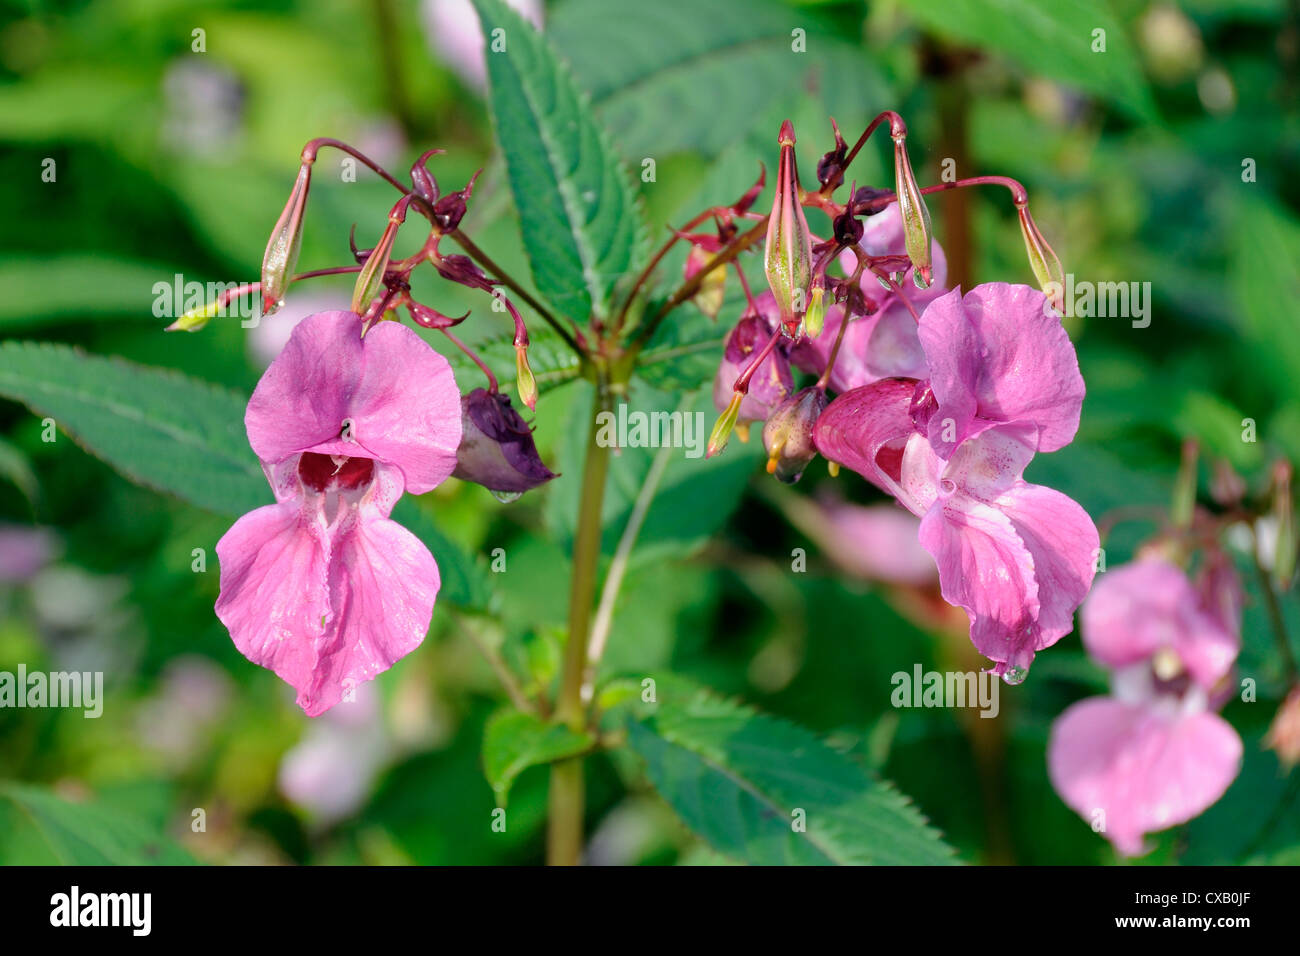 Himalayan balsam (Impatiens glandulifera) flowers and seed pods, Wiltshire, England, United Kingdom, Europe Stock Photo